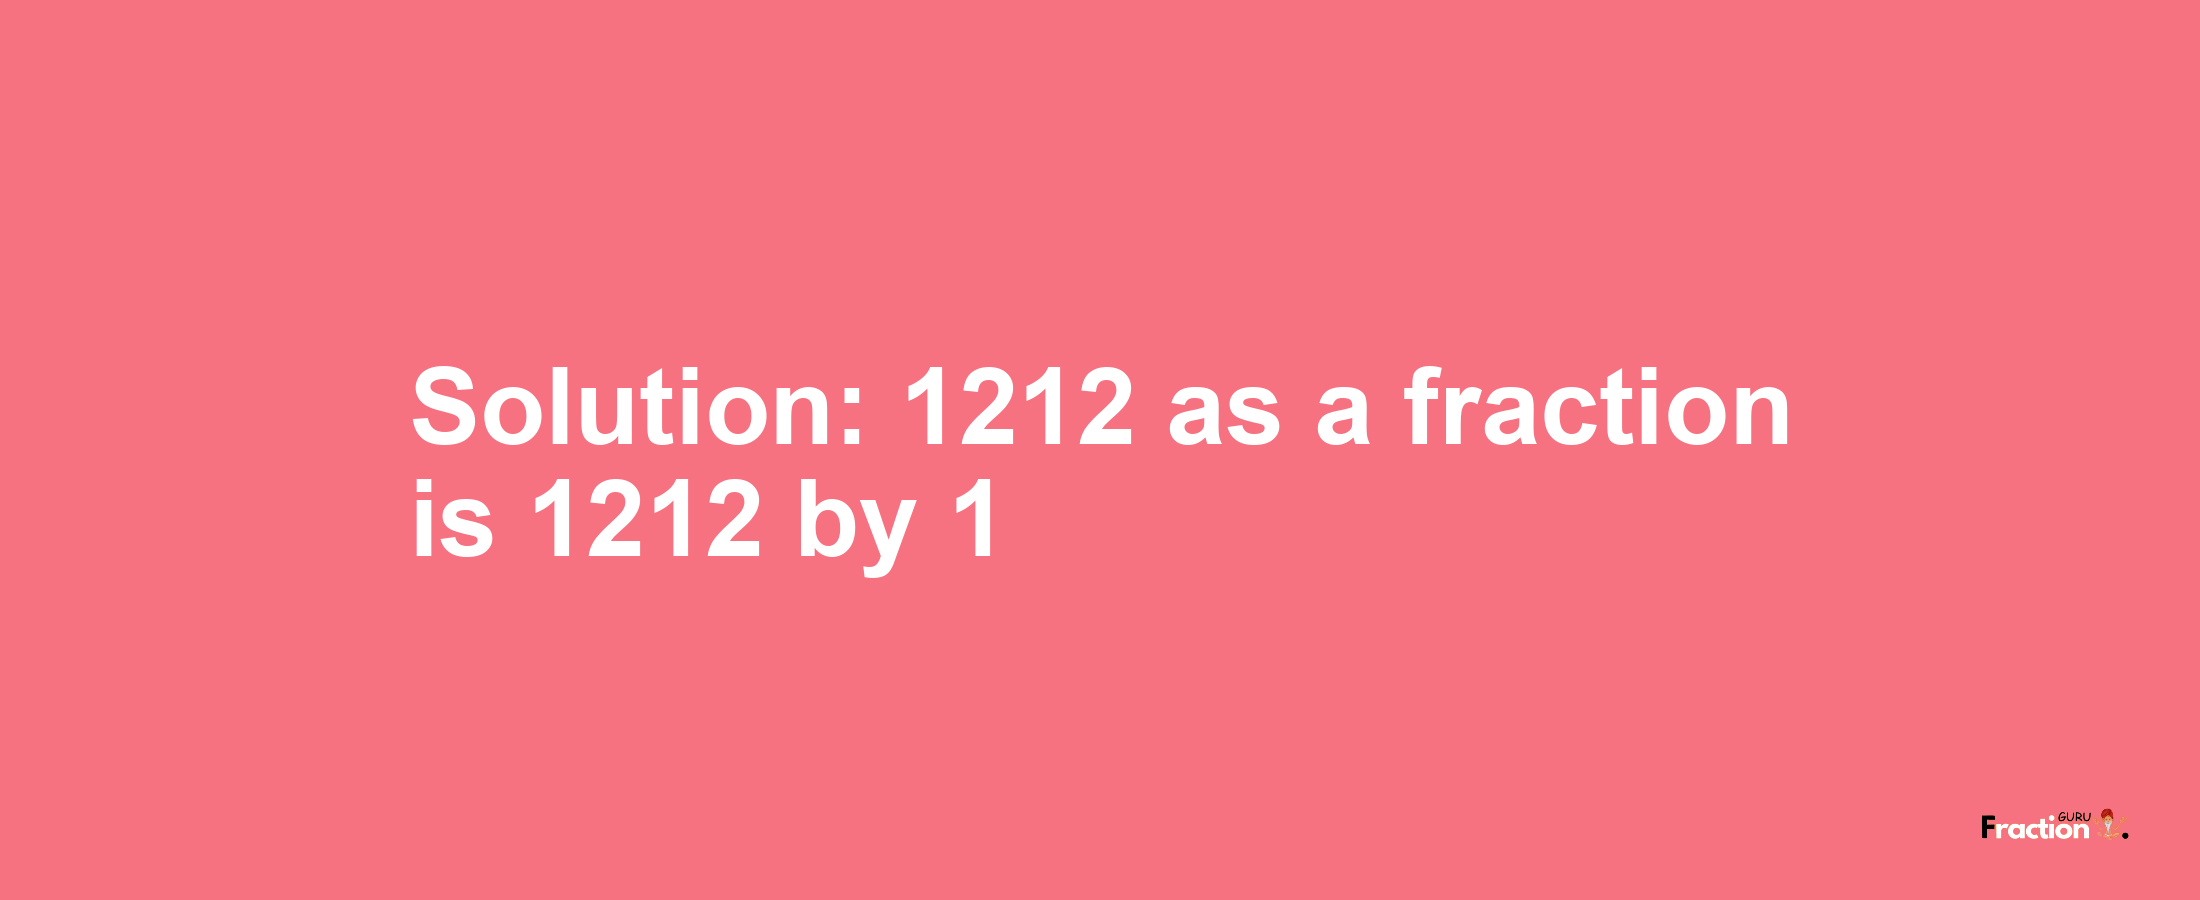 Solution:1212 as a fraction is 1212/1